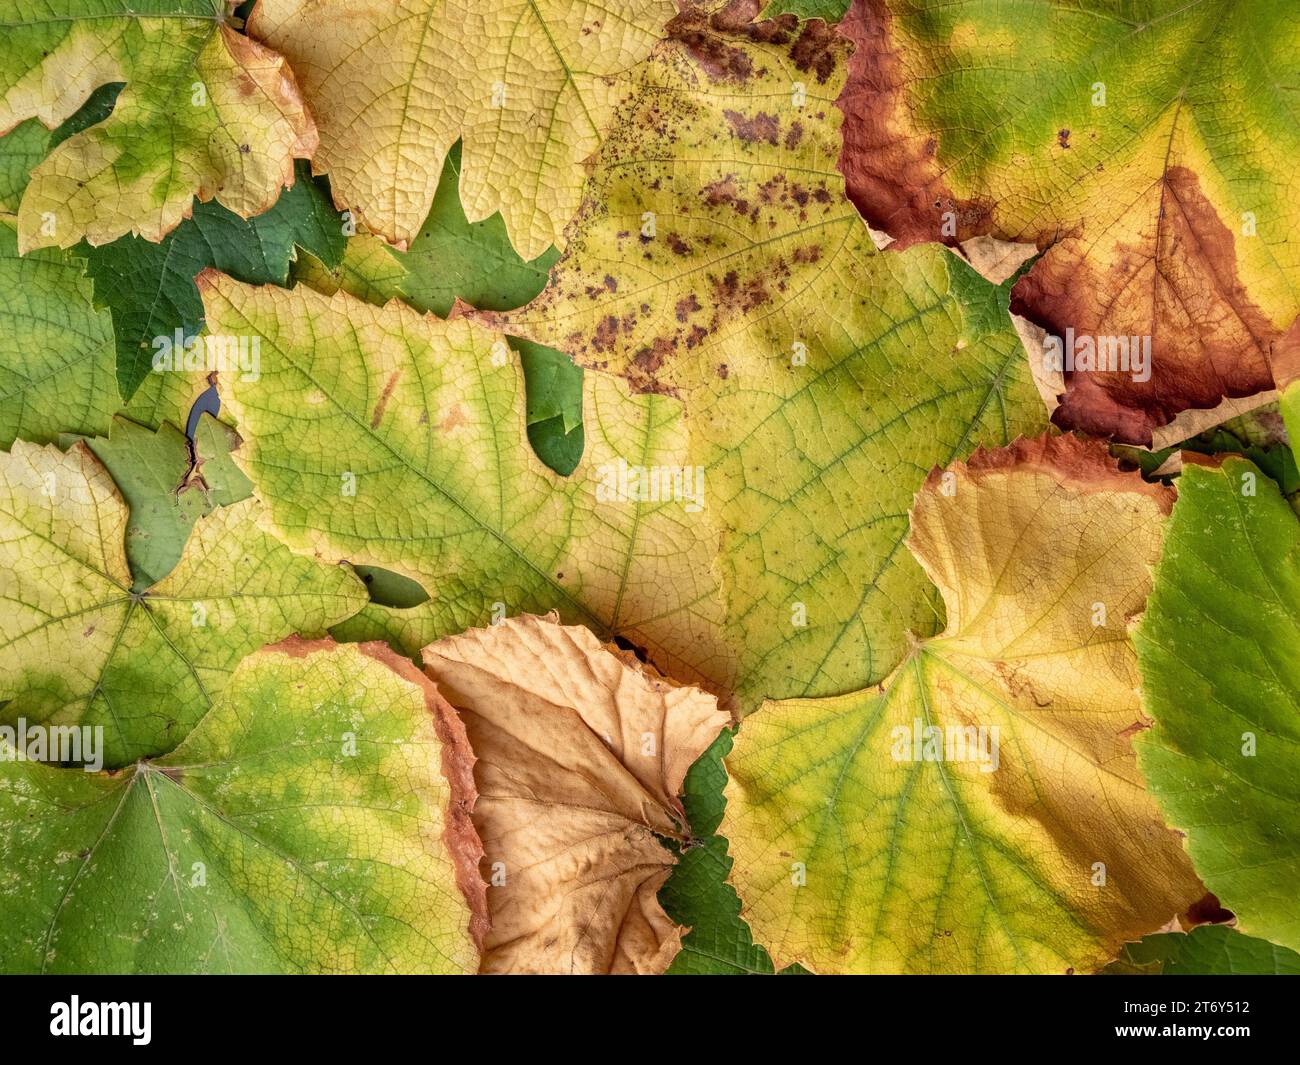 A close-up image of leaf-rotted plants featuring small red and green spots Stock Photo